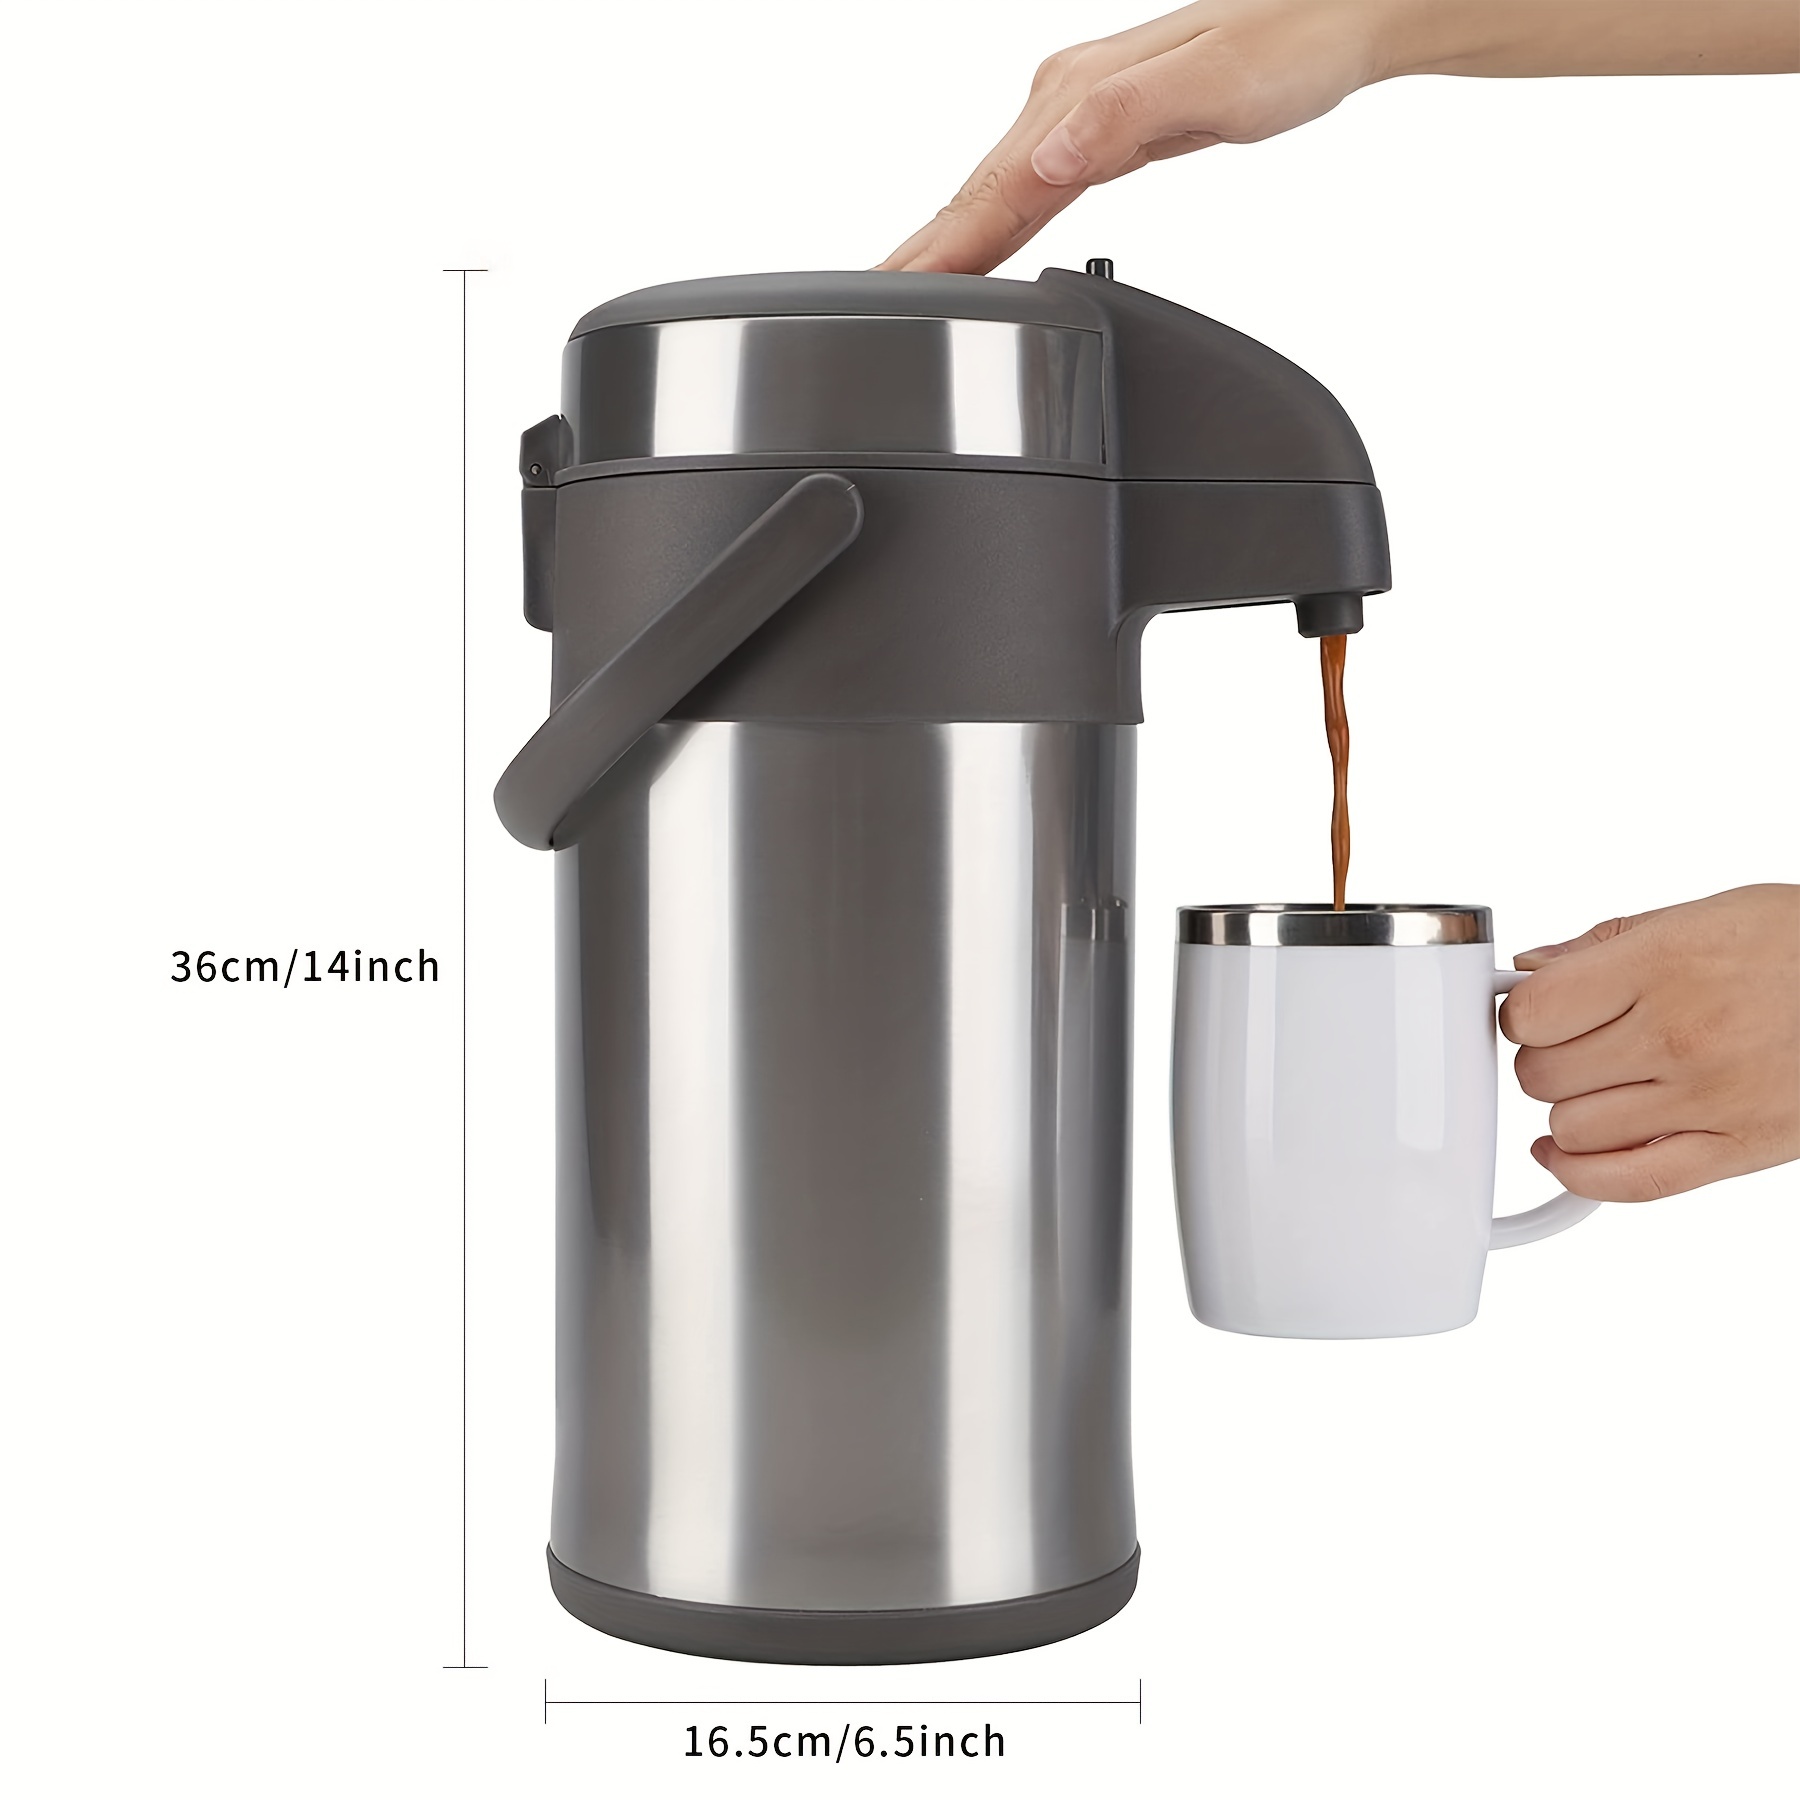 Airpot Coffee Dispenser with Pump - Insulated Stainless Steel